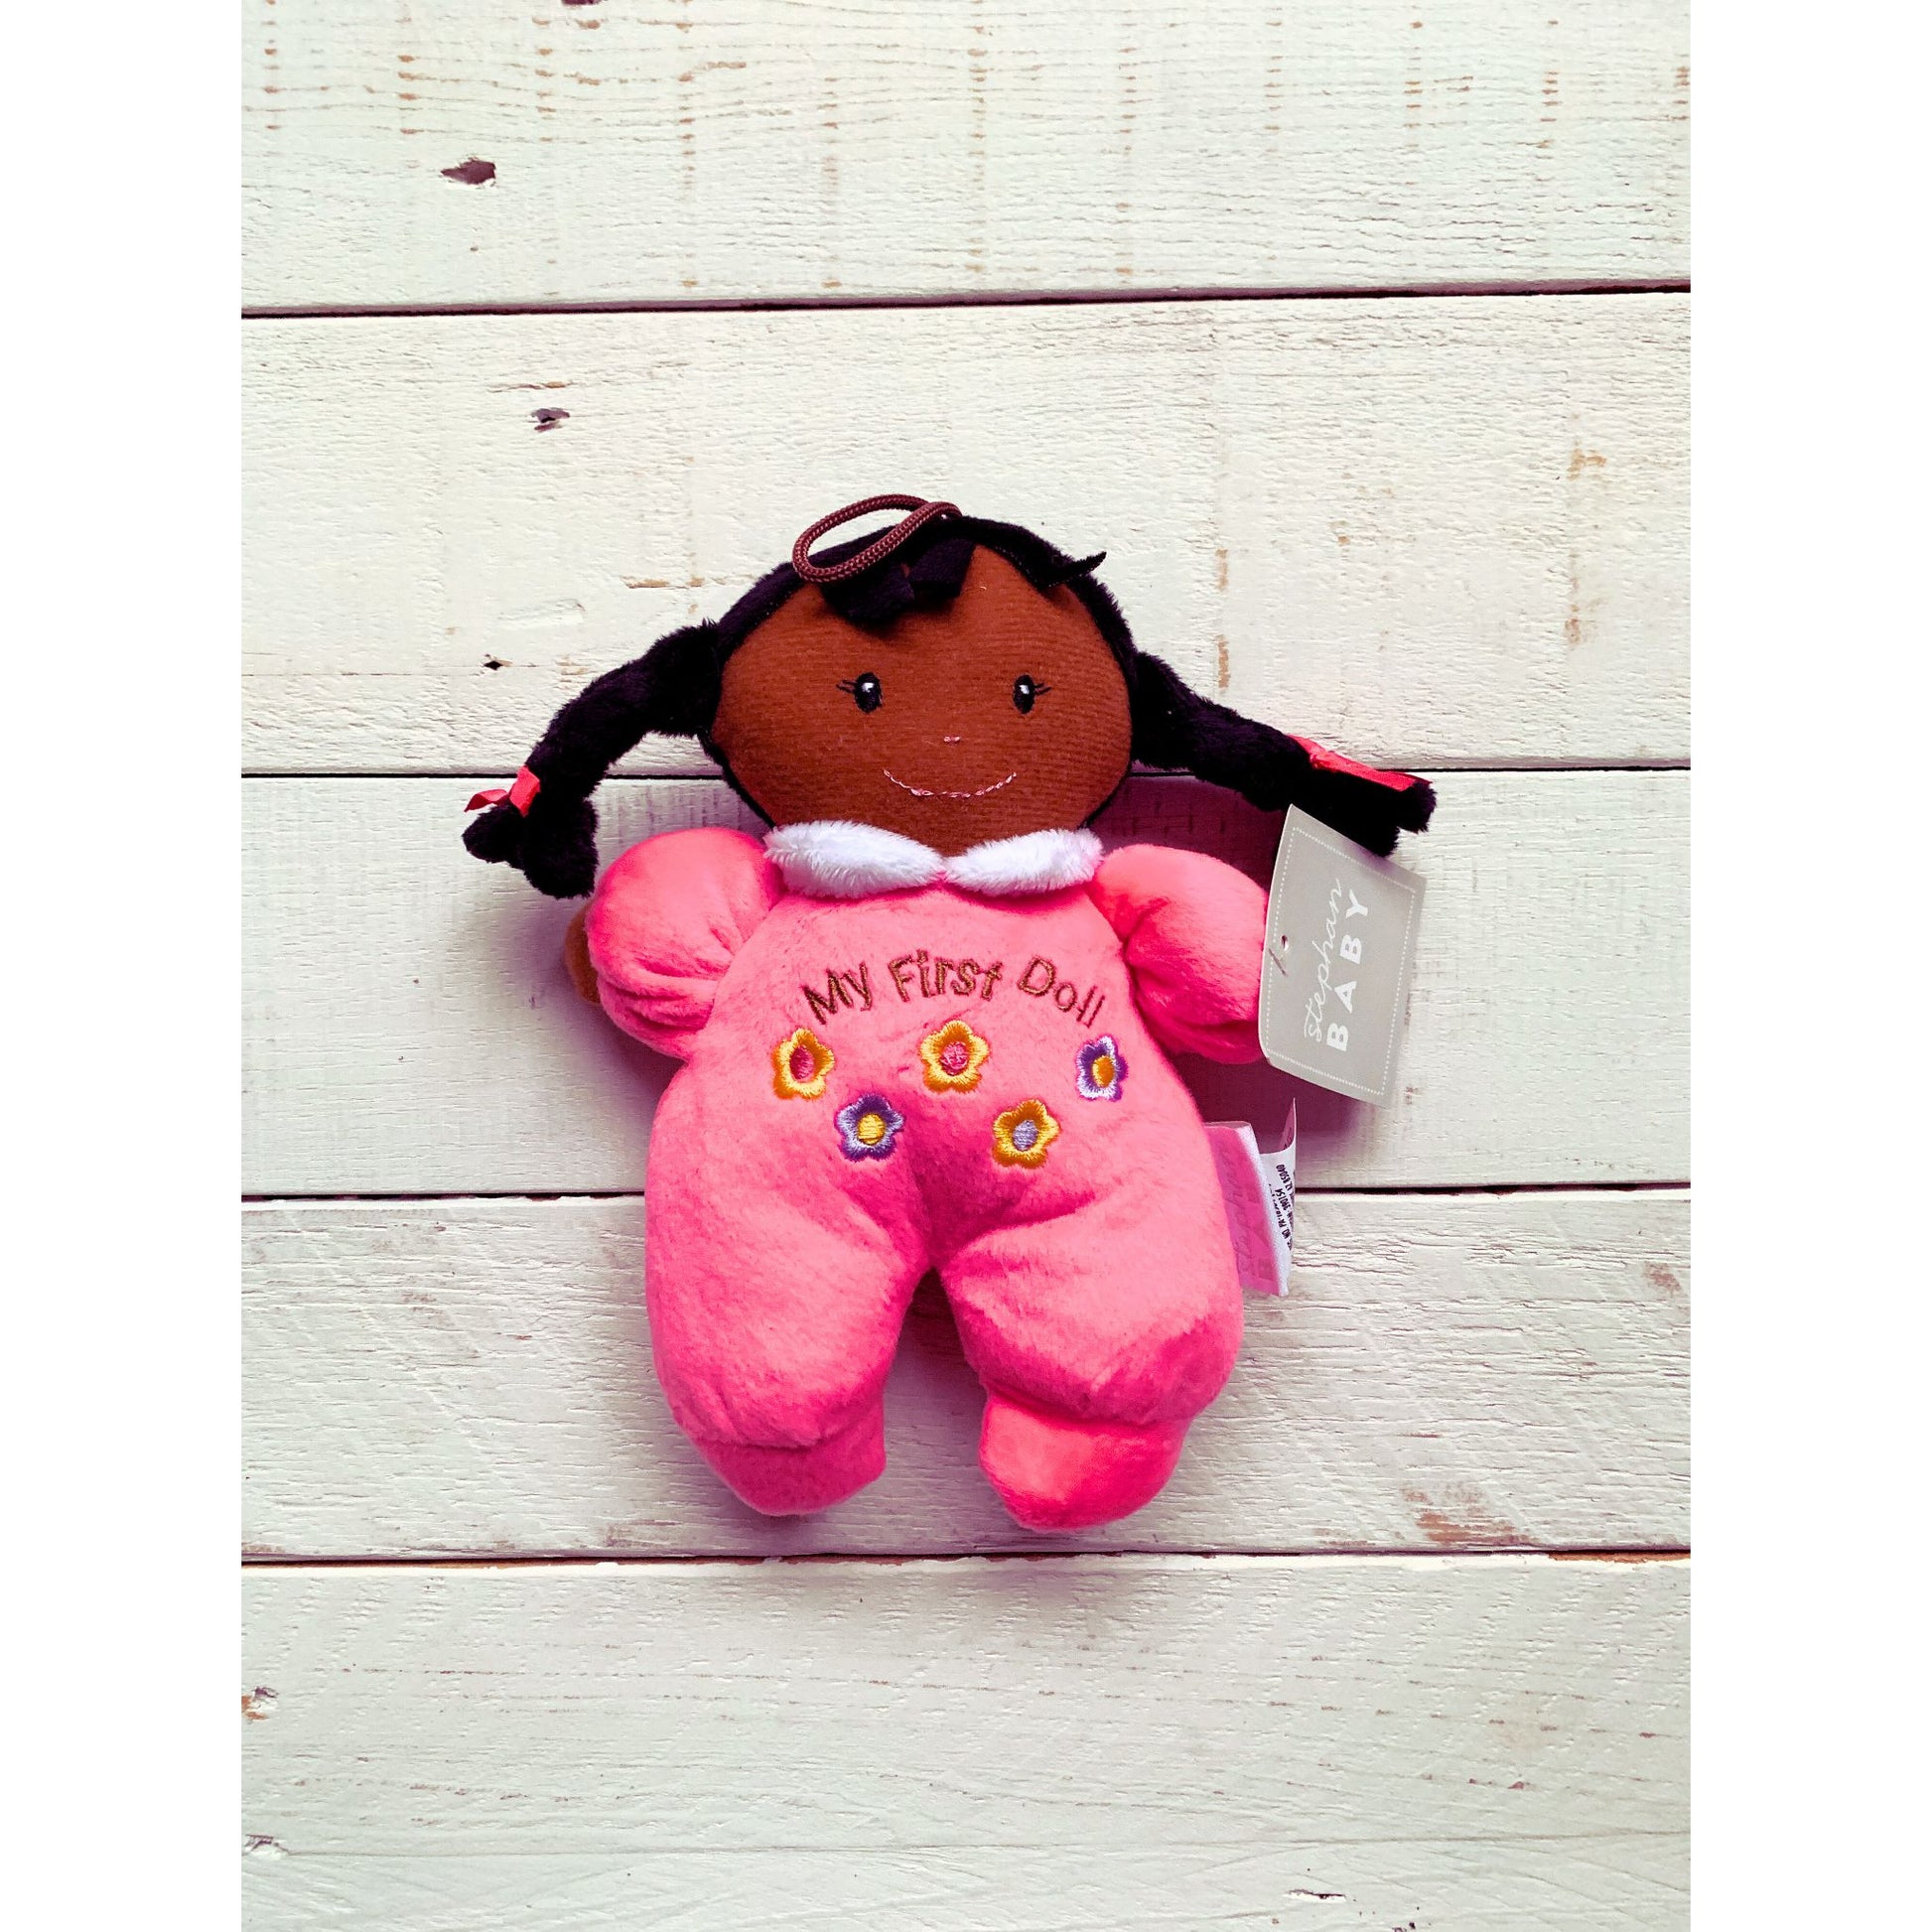 My 1st Doll in Hot Pink | African-American Soft Plush 8" Doll | Baby Gift